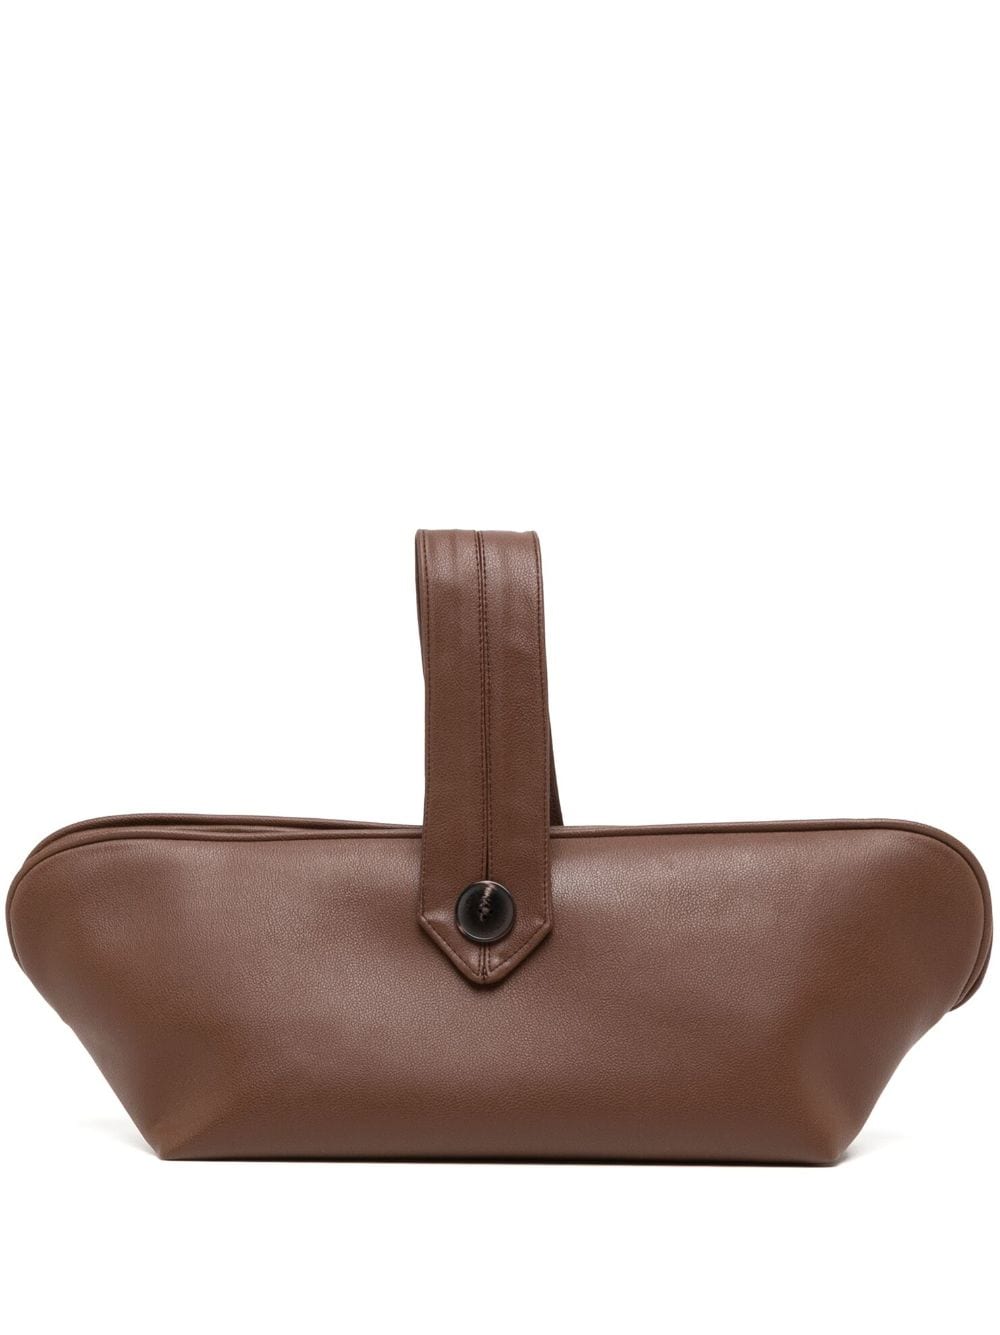 0711 Diana leather clutch - Brown